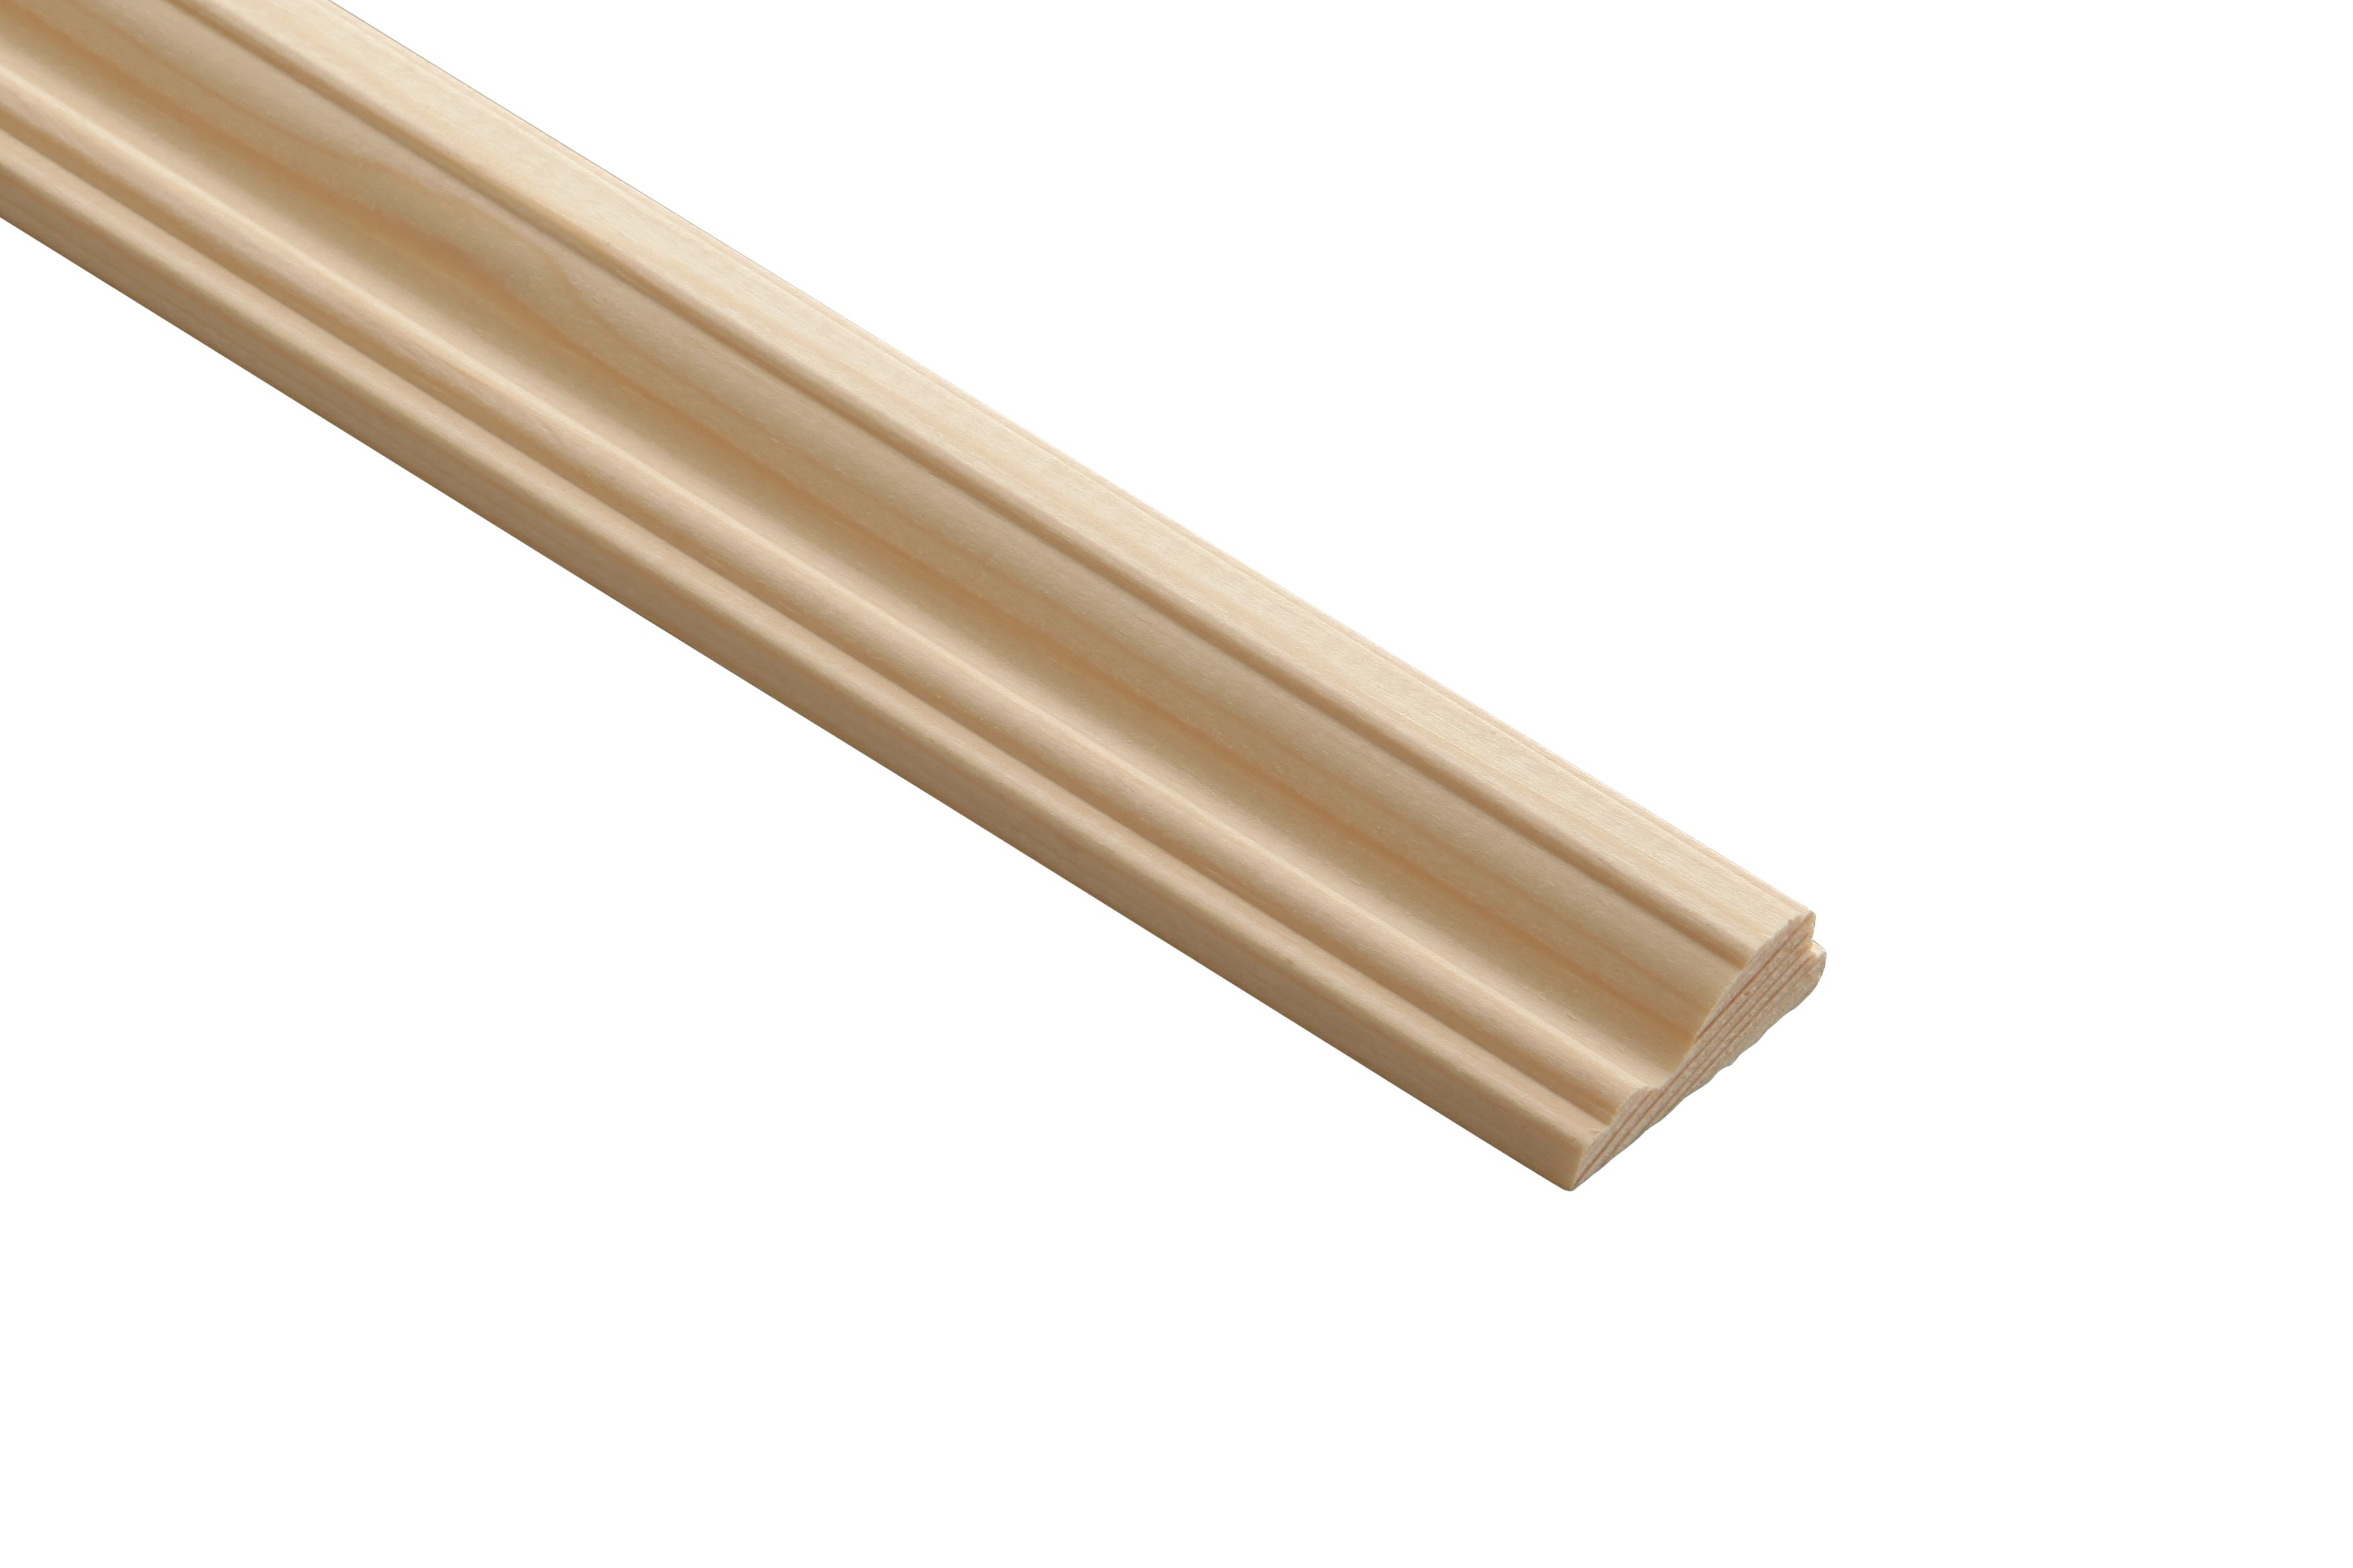 Image of Wickes Pine Decorative Cover Moulding - 12 x 32 x 2400mm